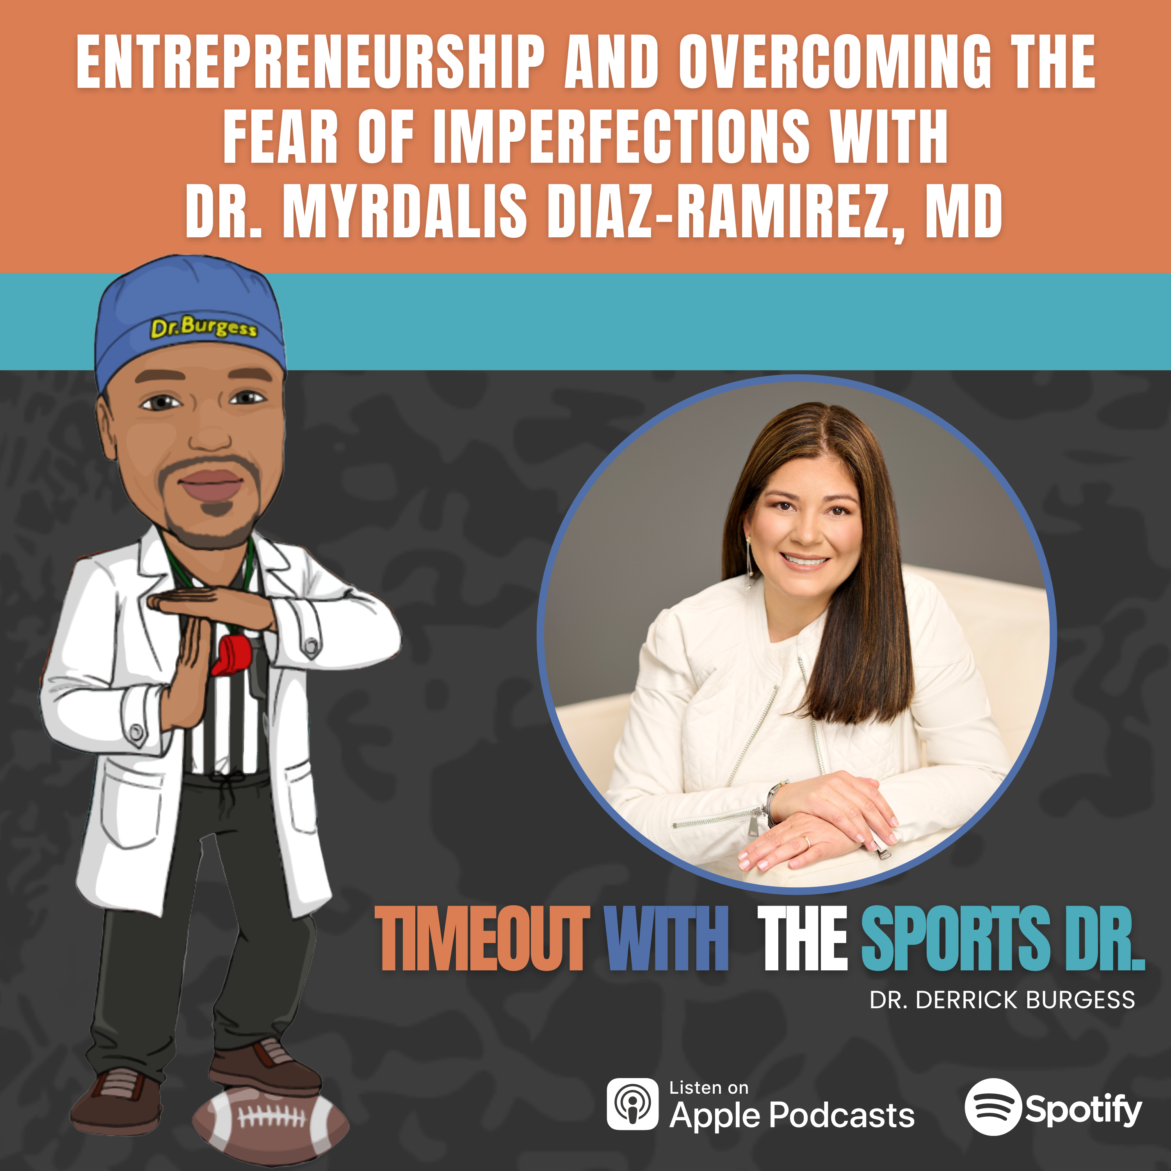 Black Podcasting - Entrepreneurship and Overcoming the Fear of Imperfections with Dr. Myrdalis Diaz-Ramirez, MD